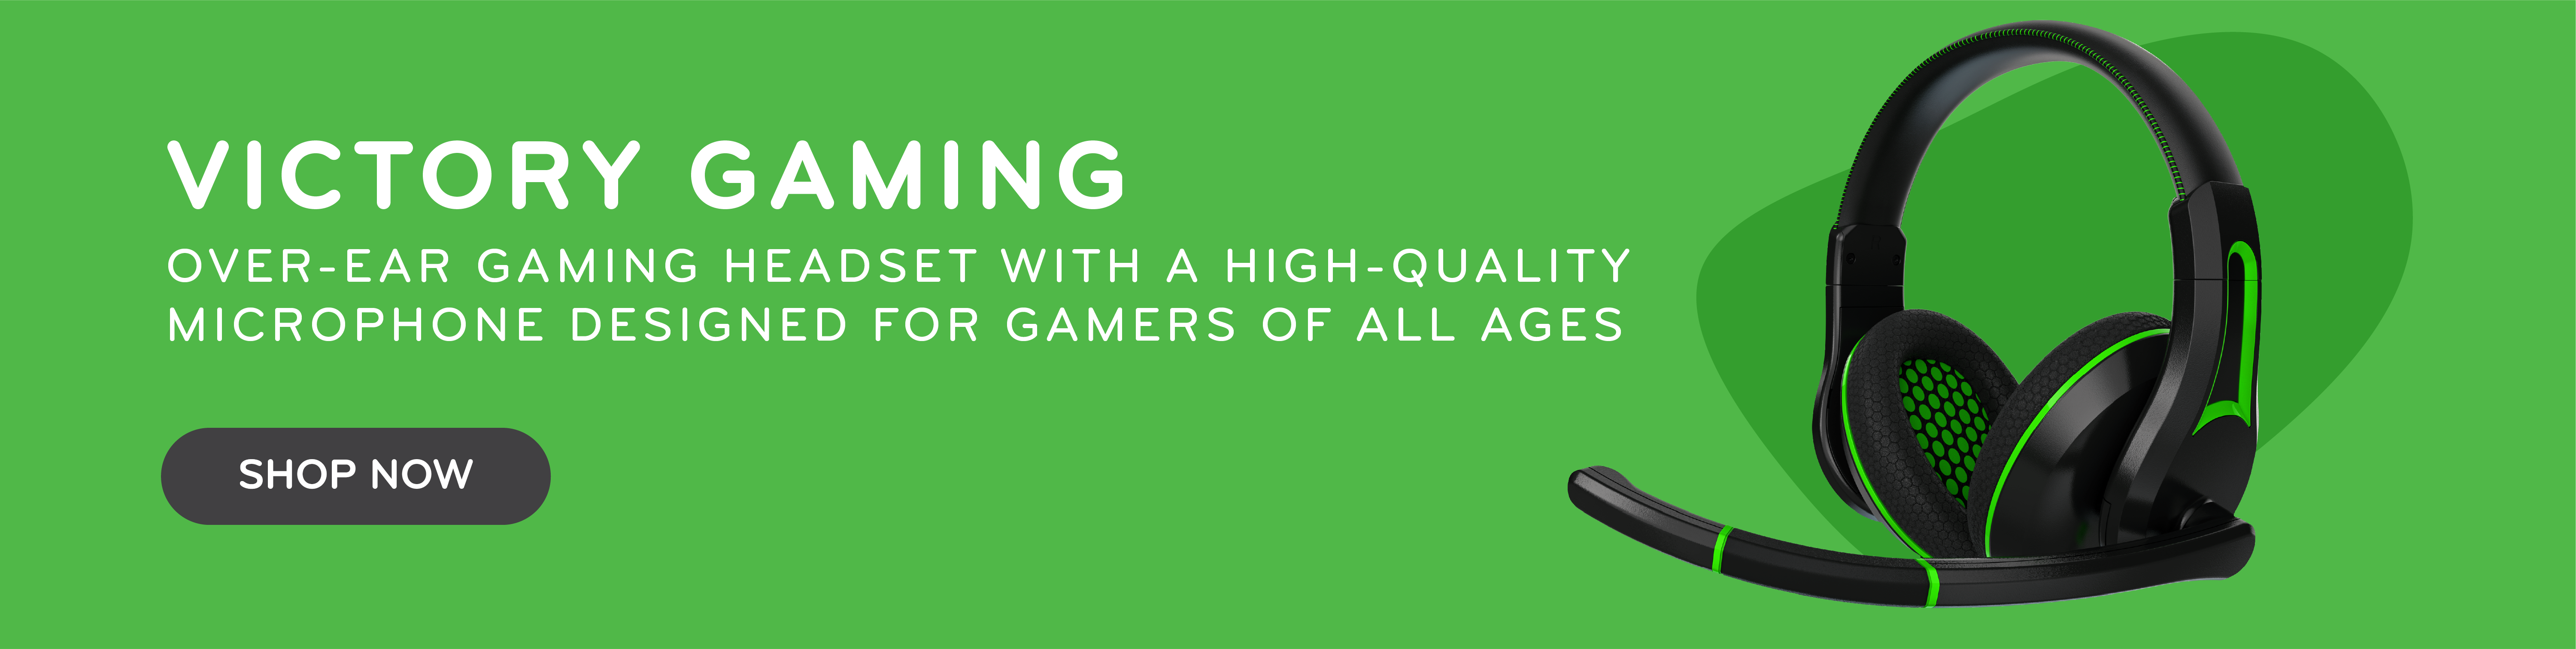 Victory Gaming over-ear, durable and long-lasting gaming headset with a high-quality microphone designed for games of all ages. The TWT Audio 250XG gaming headset. Click to shop